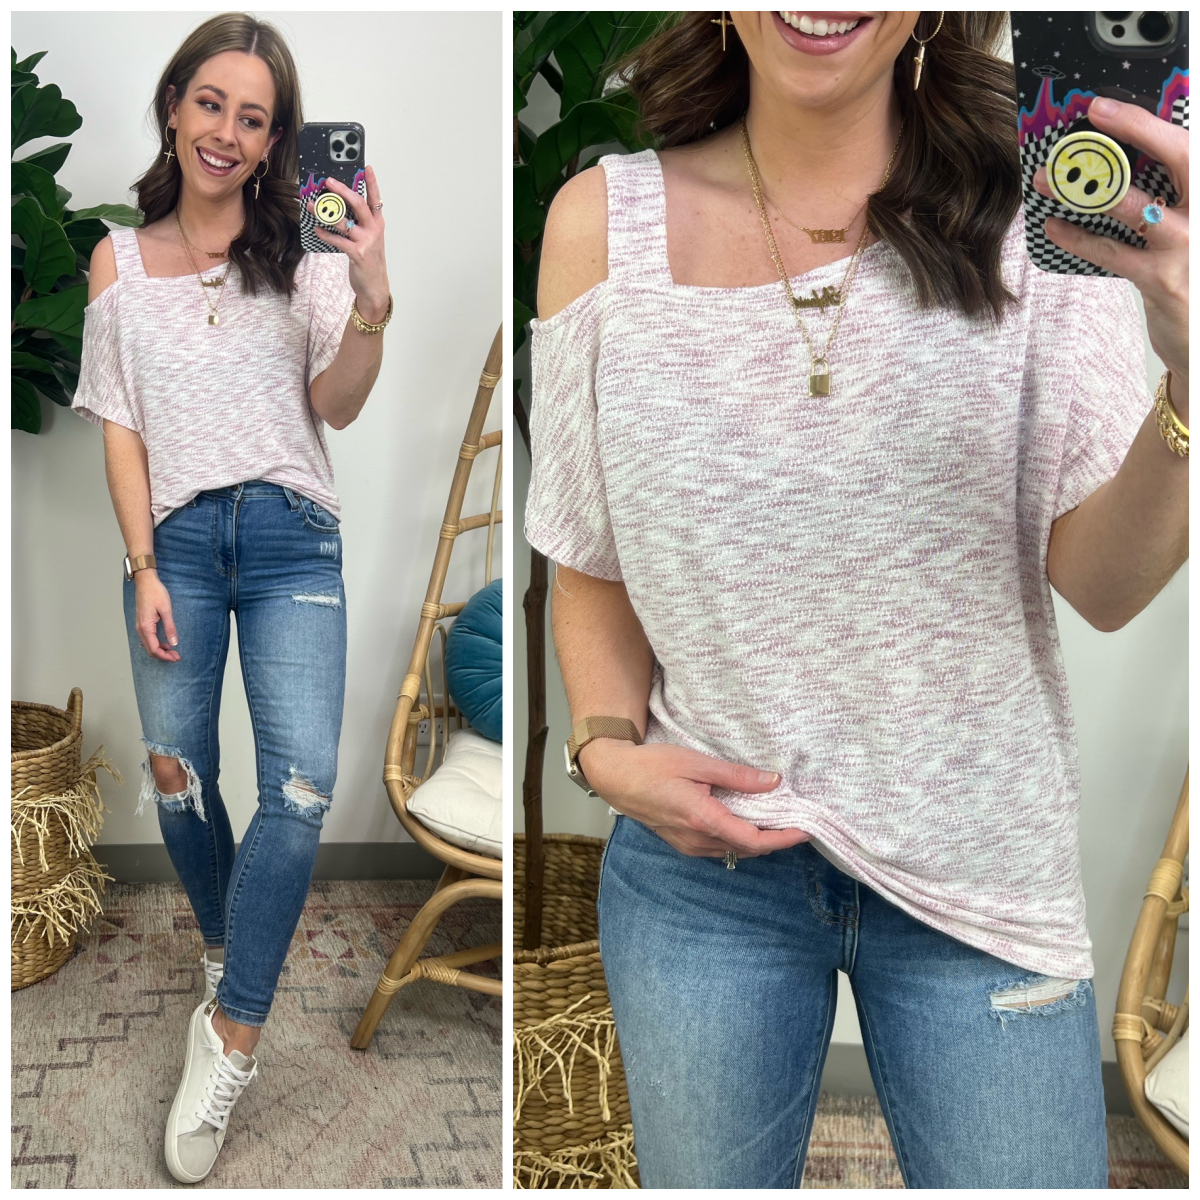  Said it All Cold Shoulder Strappy Top - FINAL SALE - Madison and Mallory